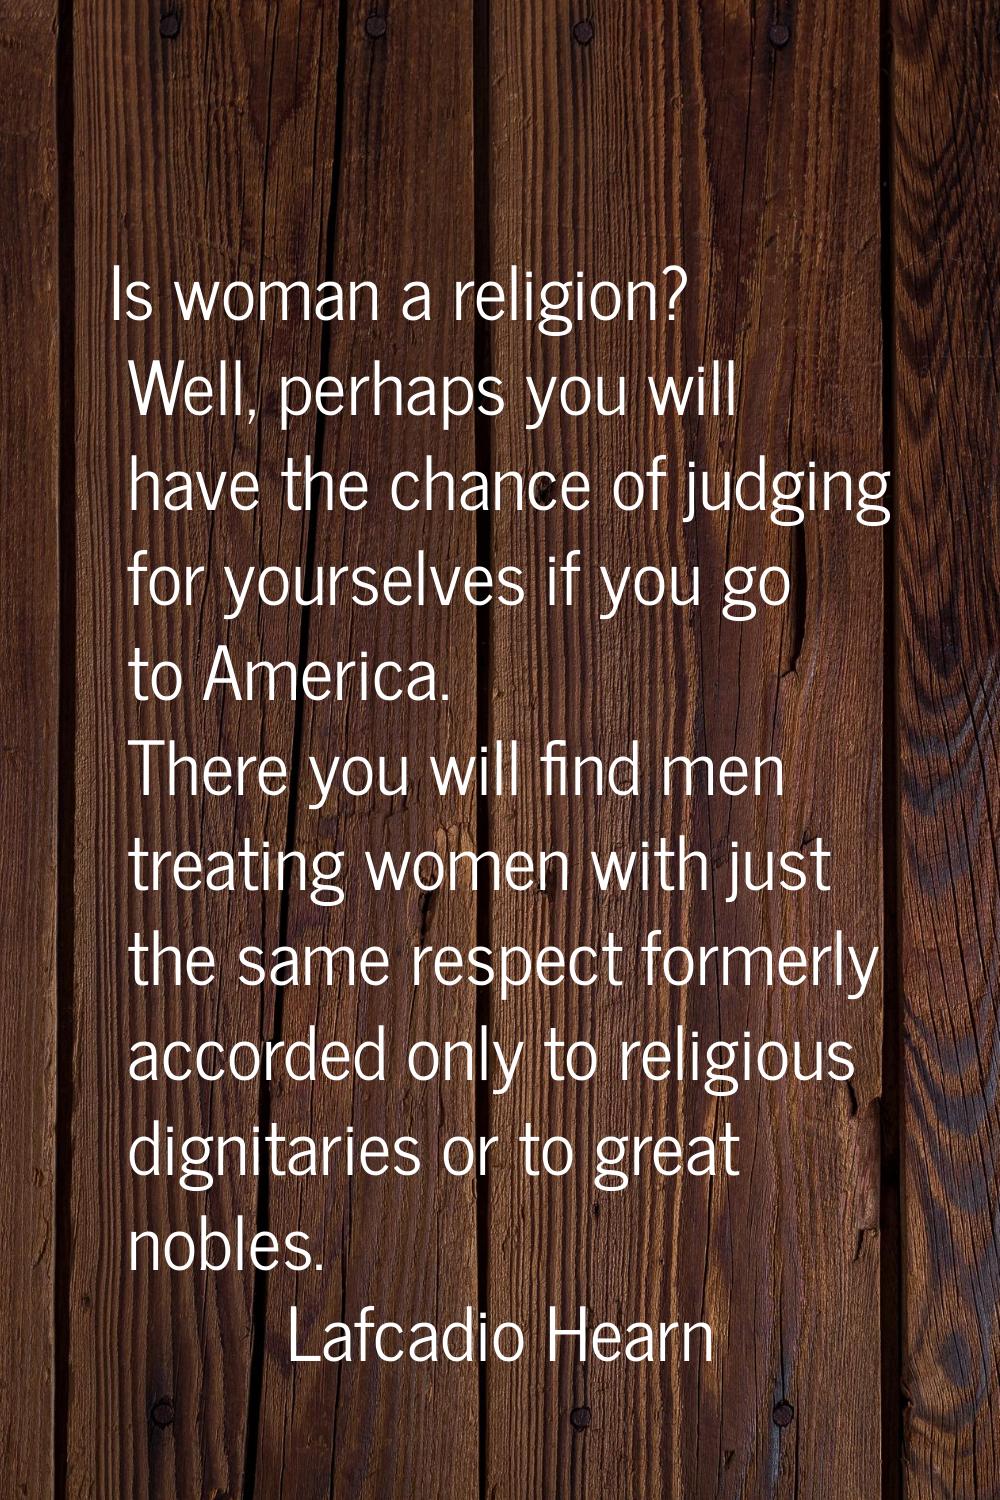 Is woman a religion? Well, perhaps you will have the chance of judging for yourselves if you go to 